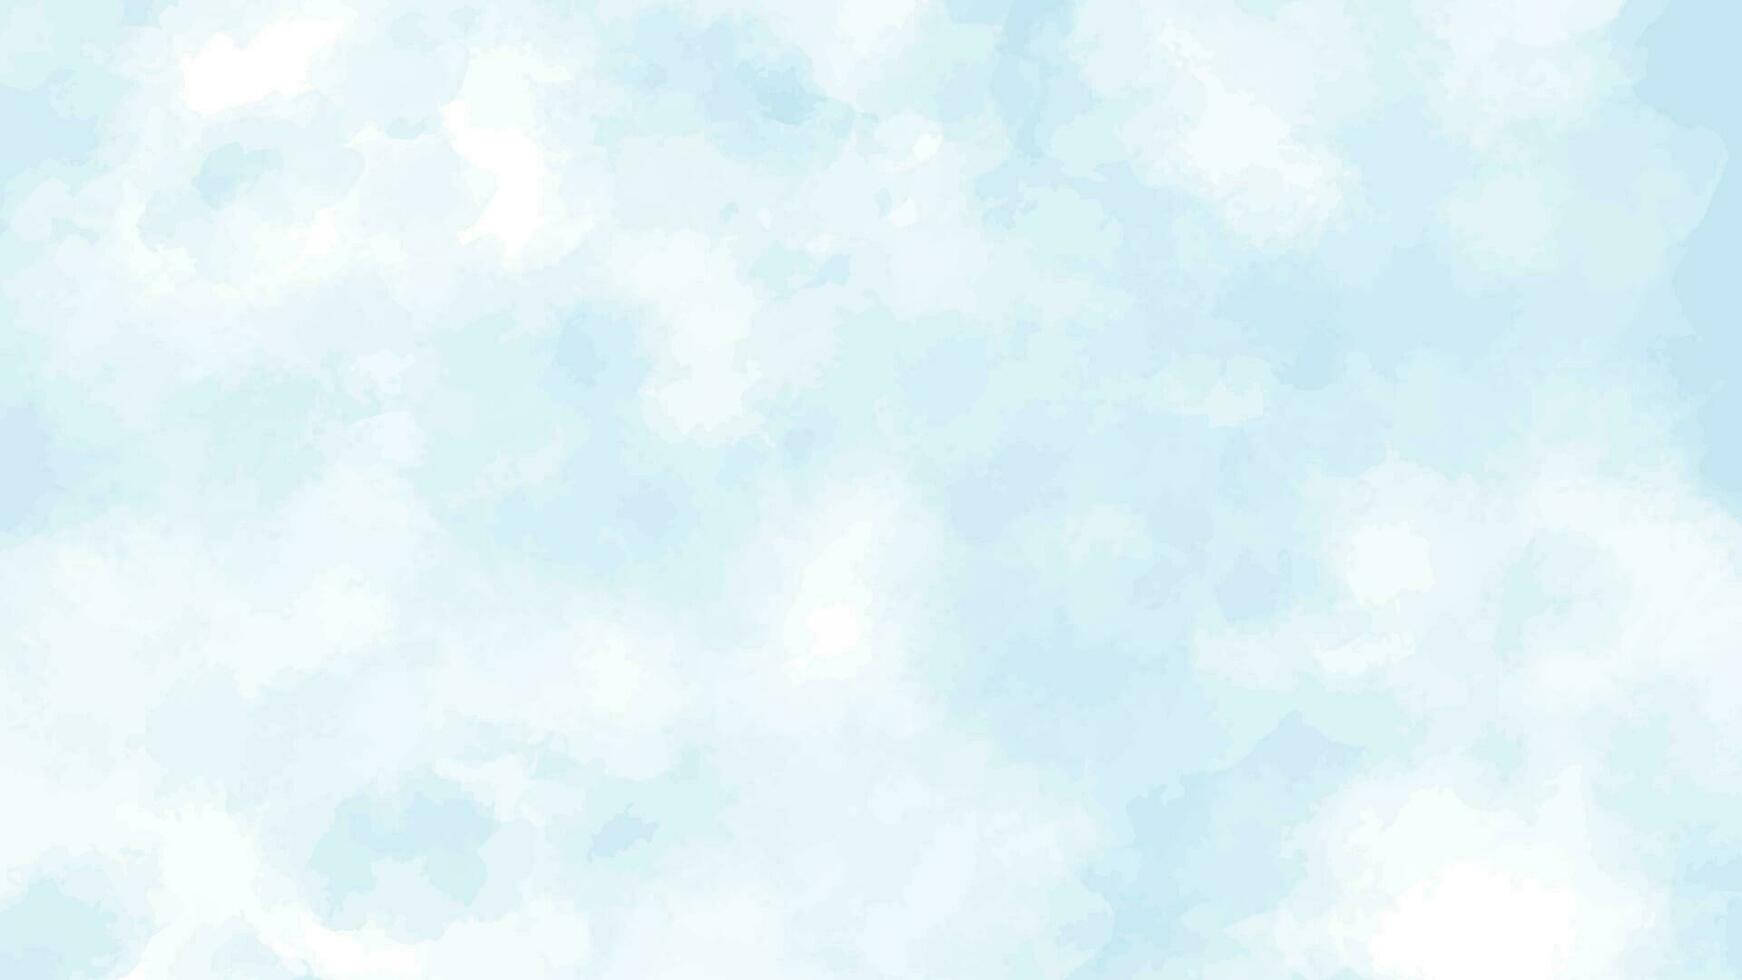 Blue watercolor sky and clouds. Light vector background